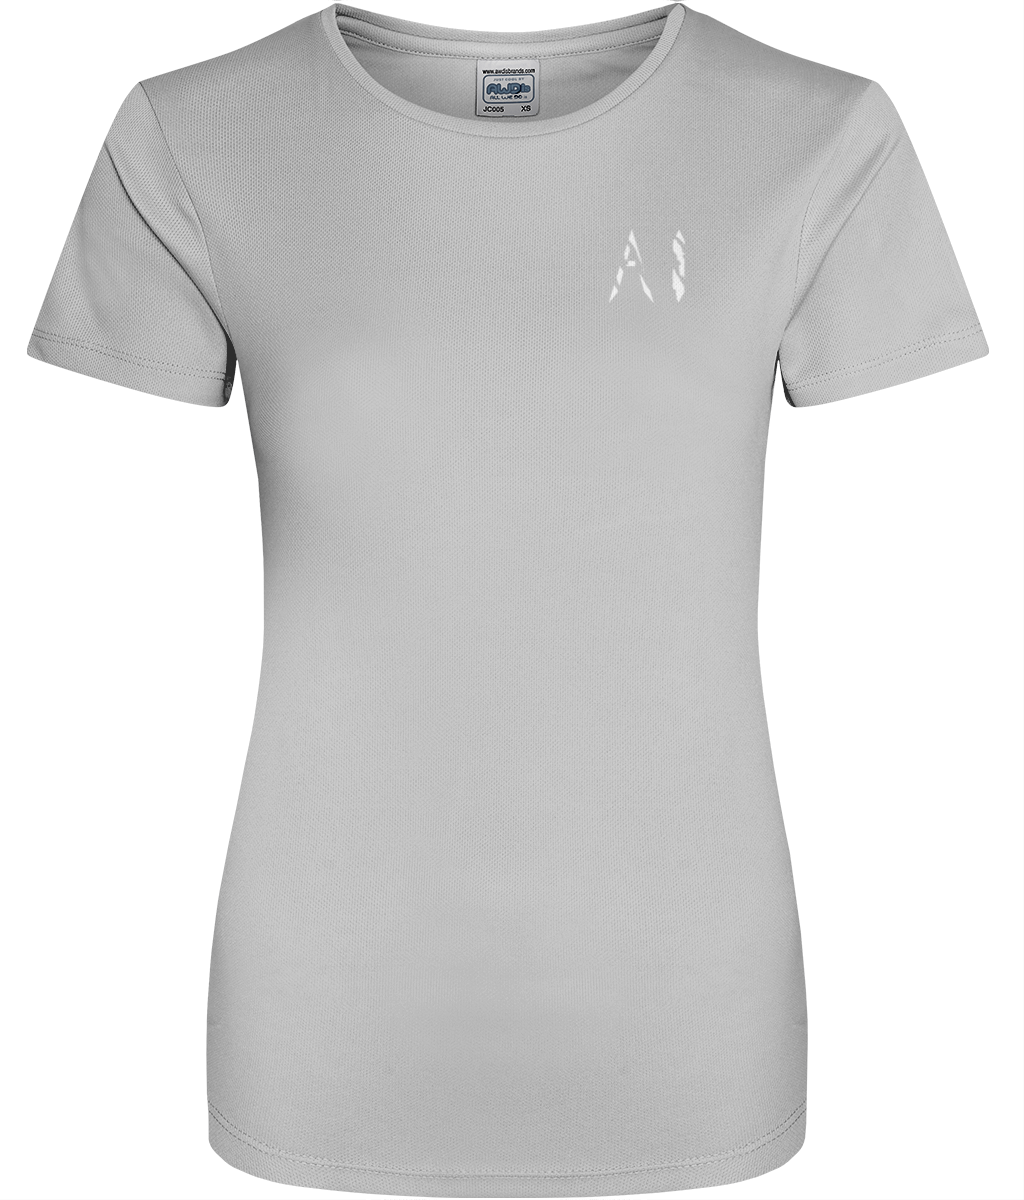 Womens light grey Athletic Sports Shirt with White AI logo on left breast